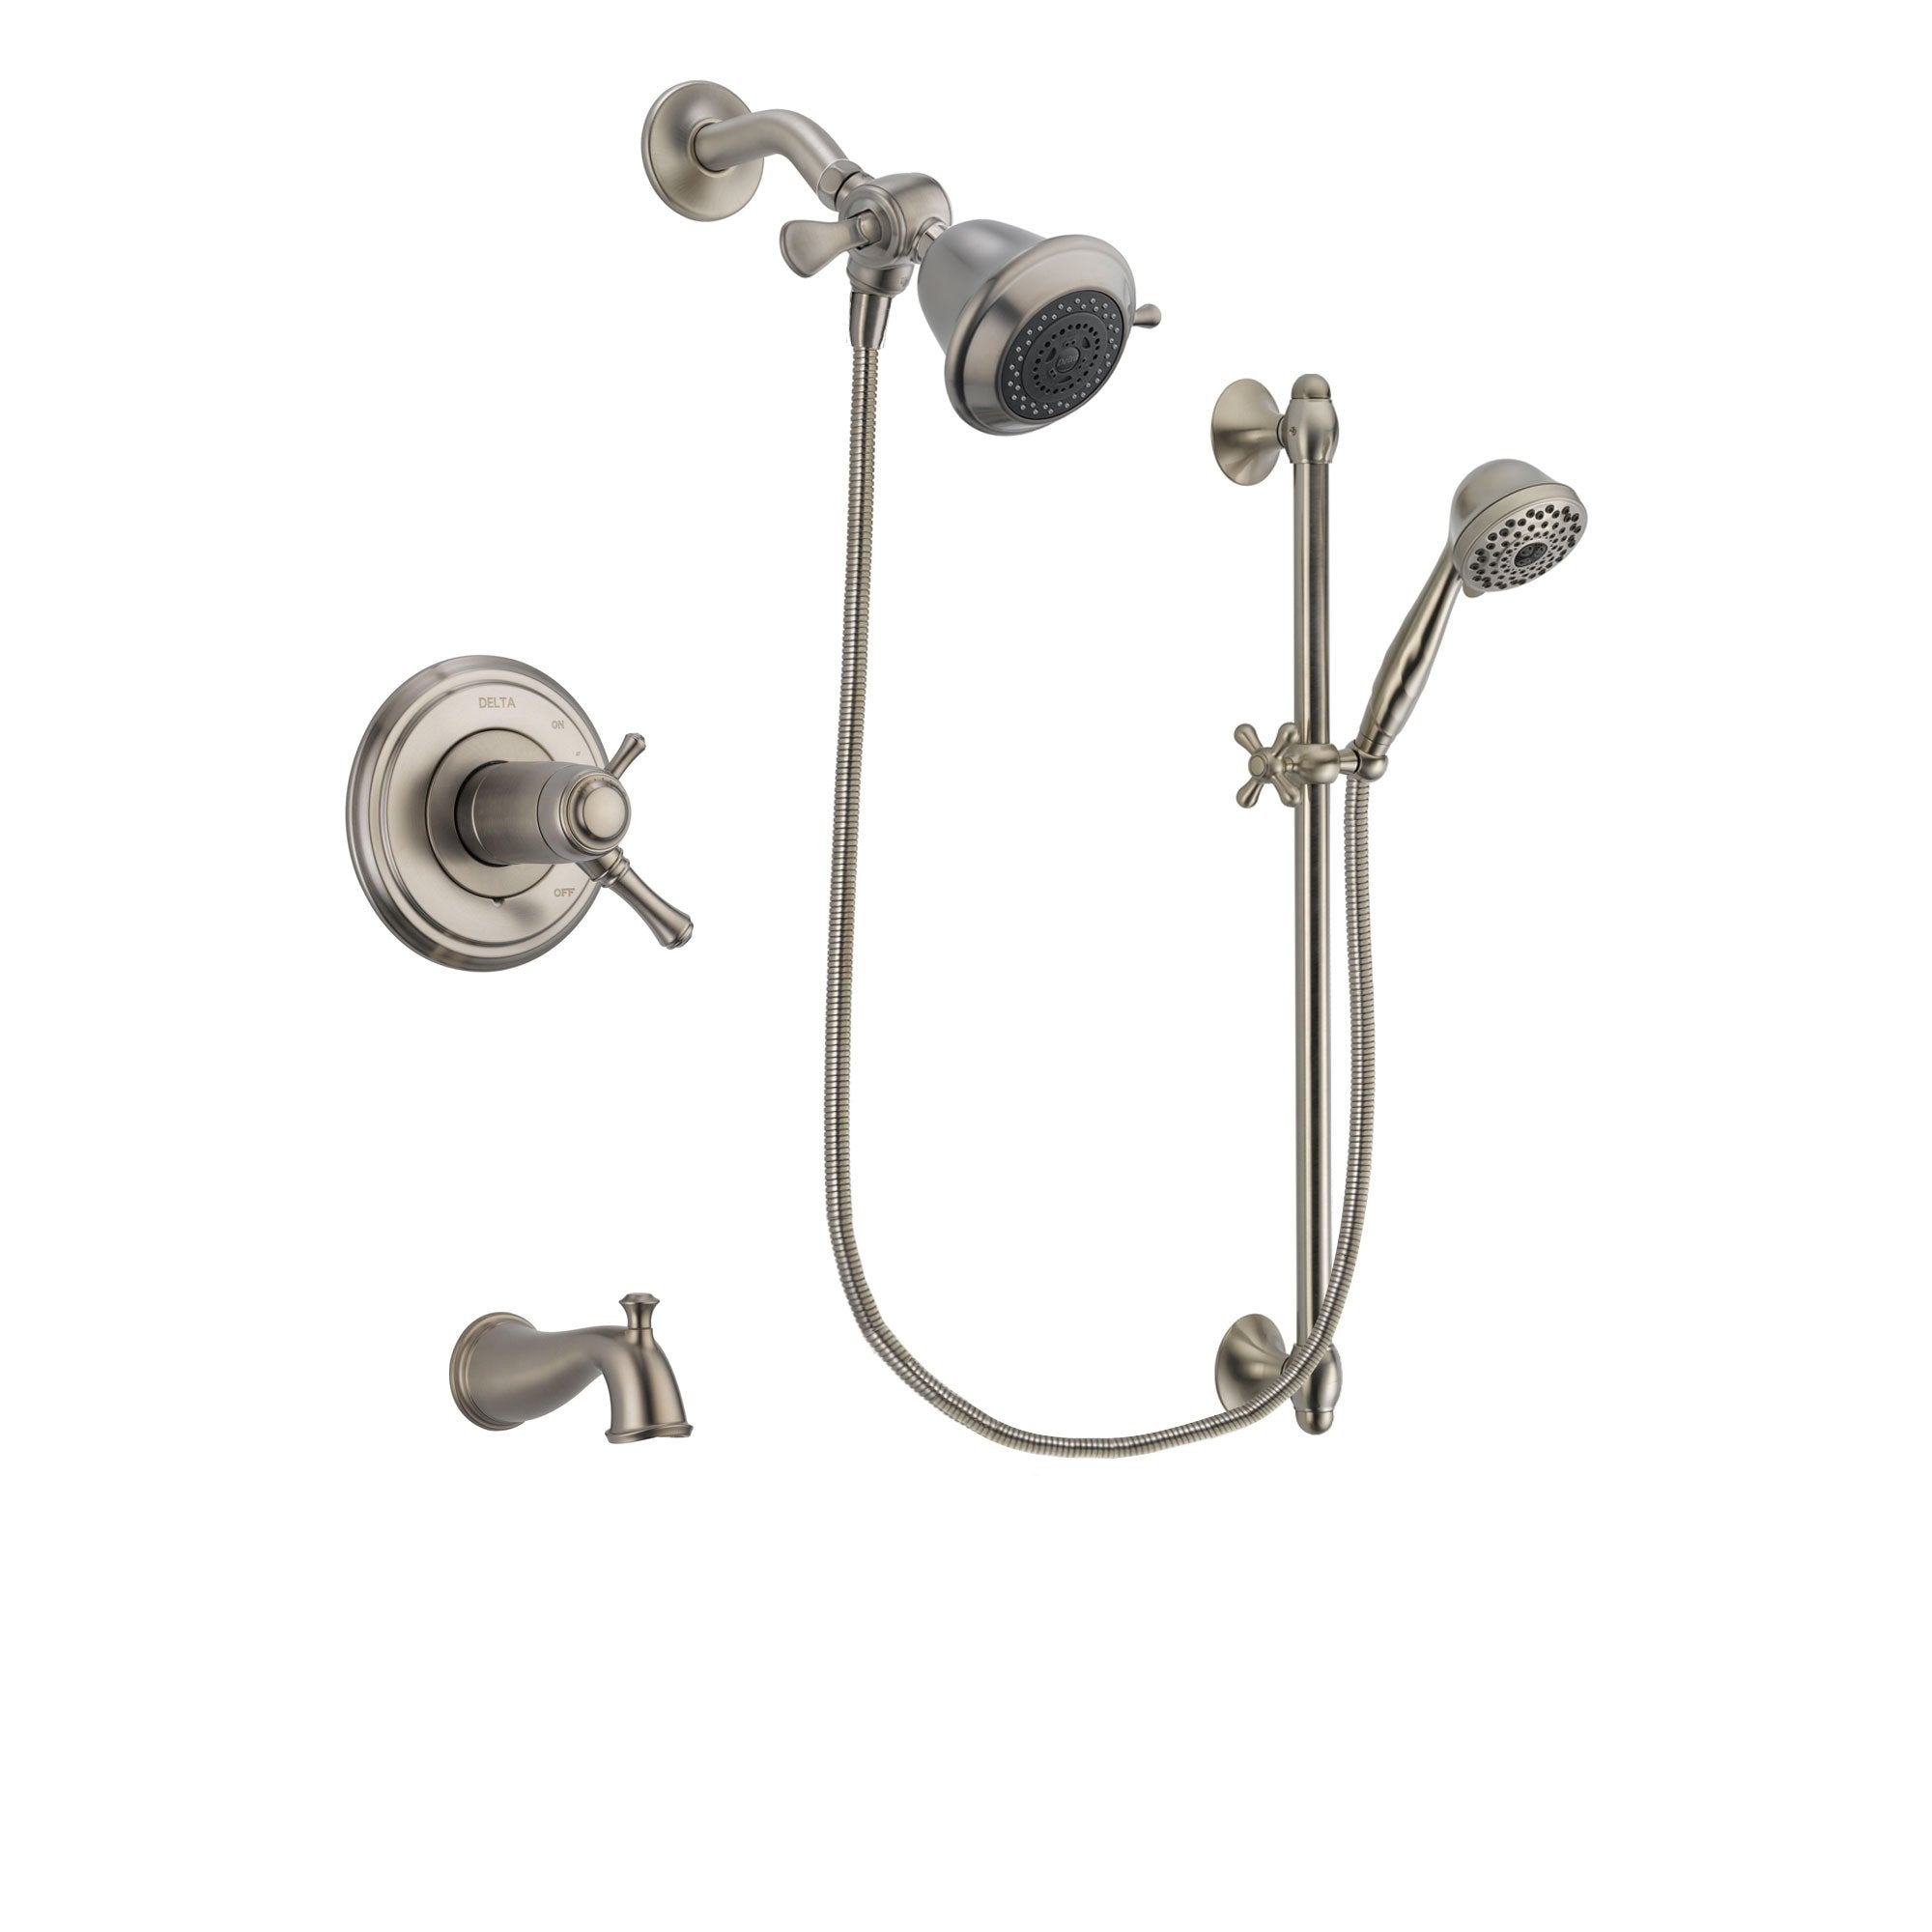 Delta Cassidy Stainless Steel Finish Thermostatic Tub and Shower Faucet System Package with Shower Head and 7-Spray Handheld Shower with Slide Bar Includes Rough-in Valve and Tub Spout DSP1657V